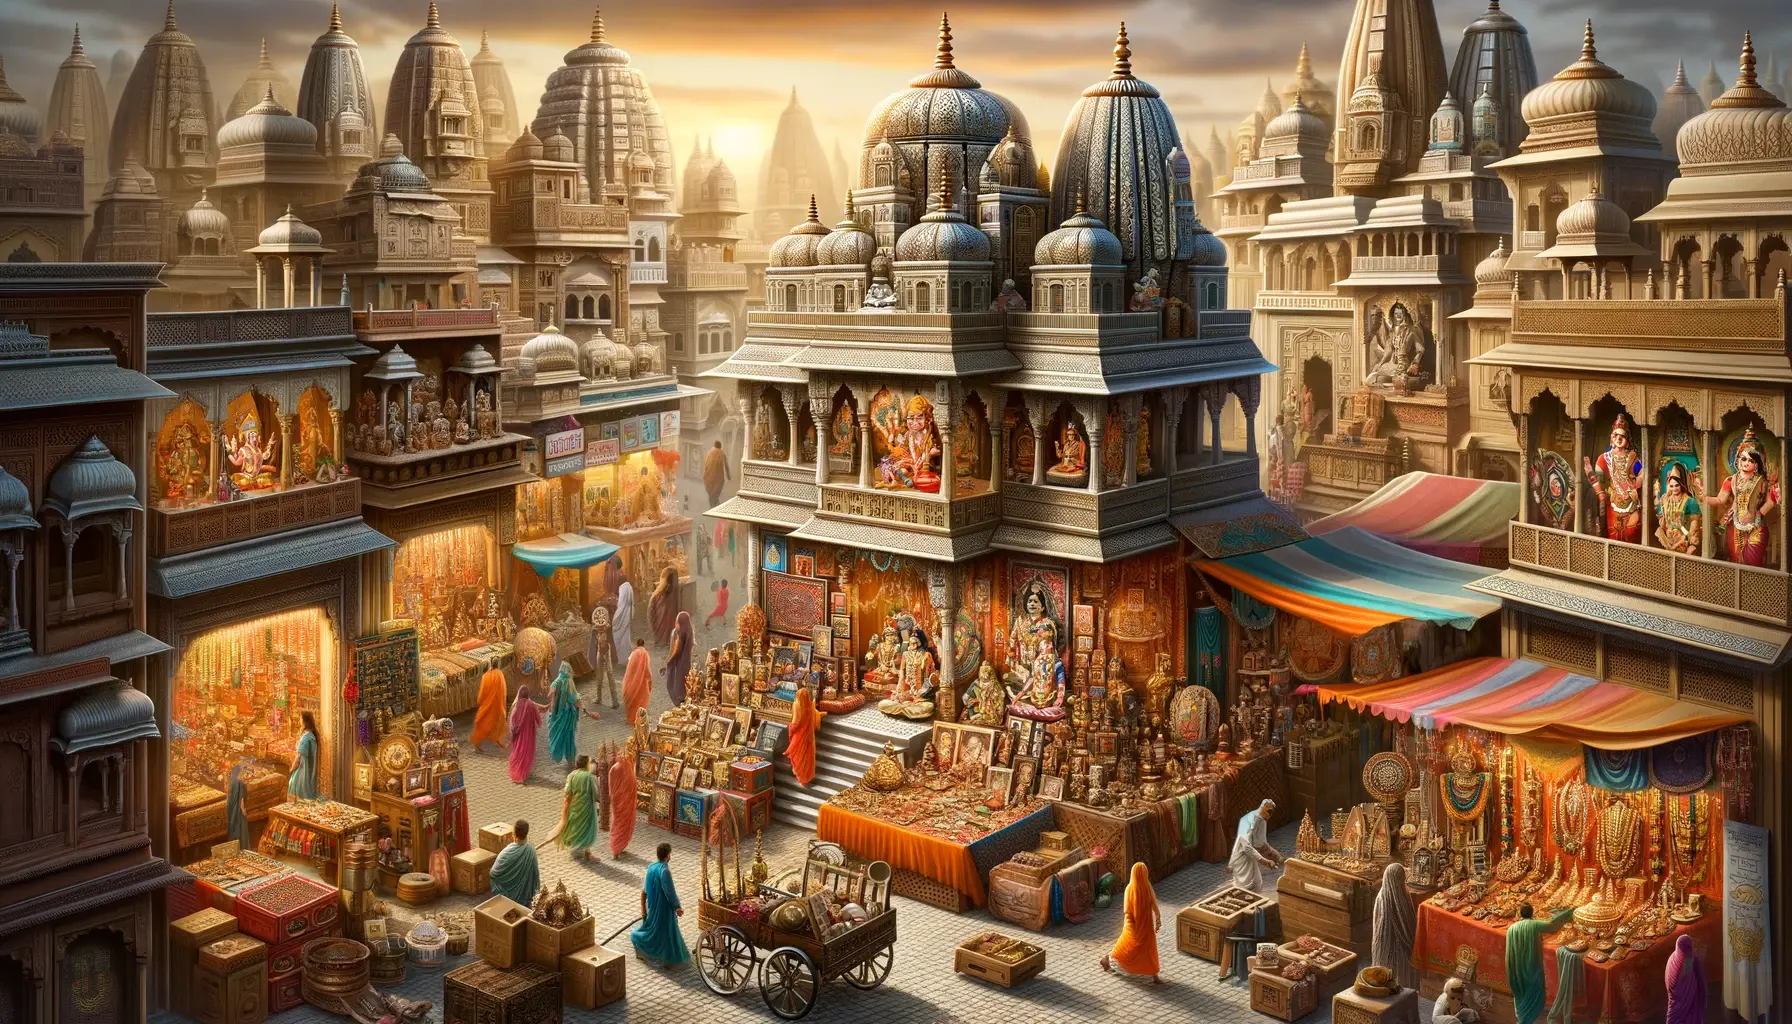 Treasures of Faith: Shopping for Religious and Cultural Artifacts in Ayodhya